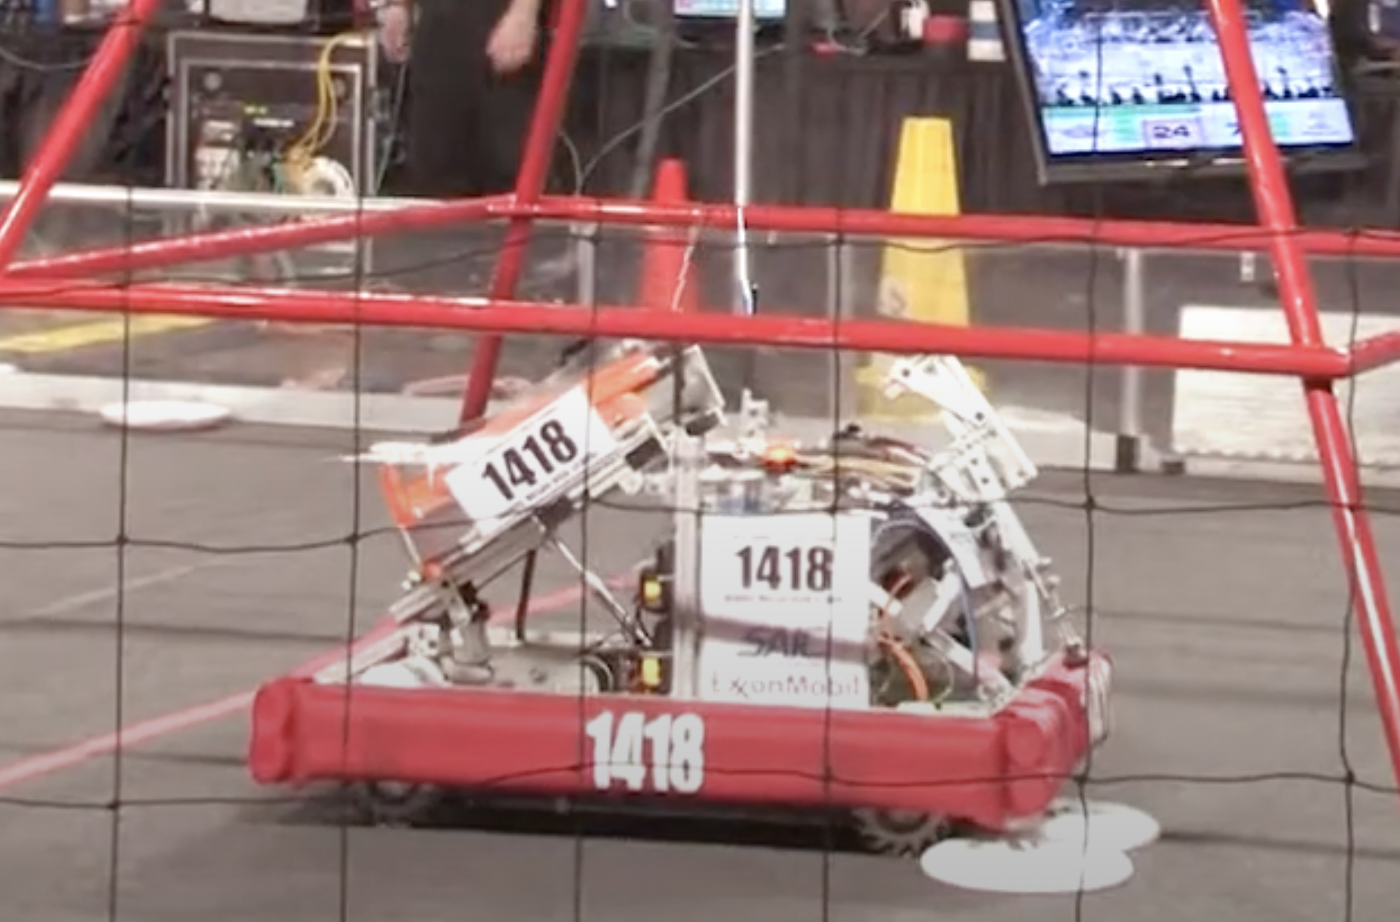 Our 2013 robot (side view).